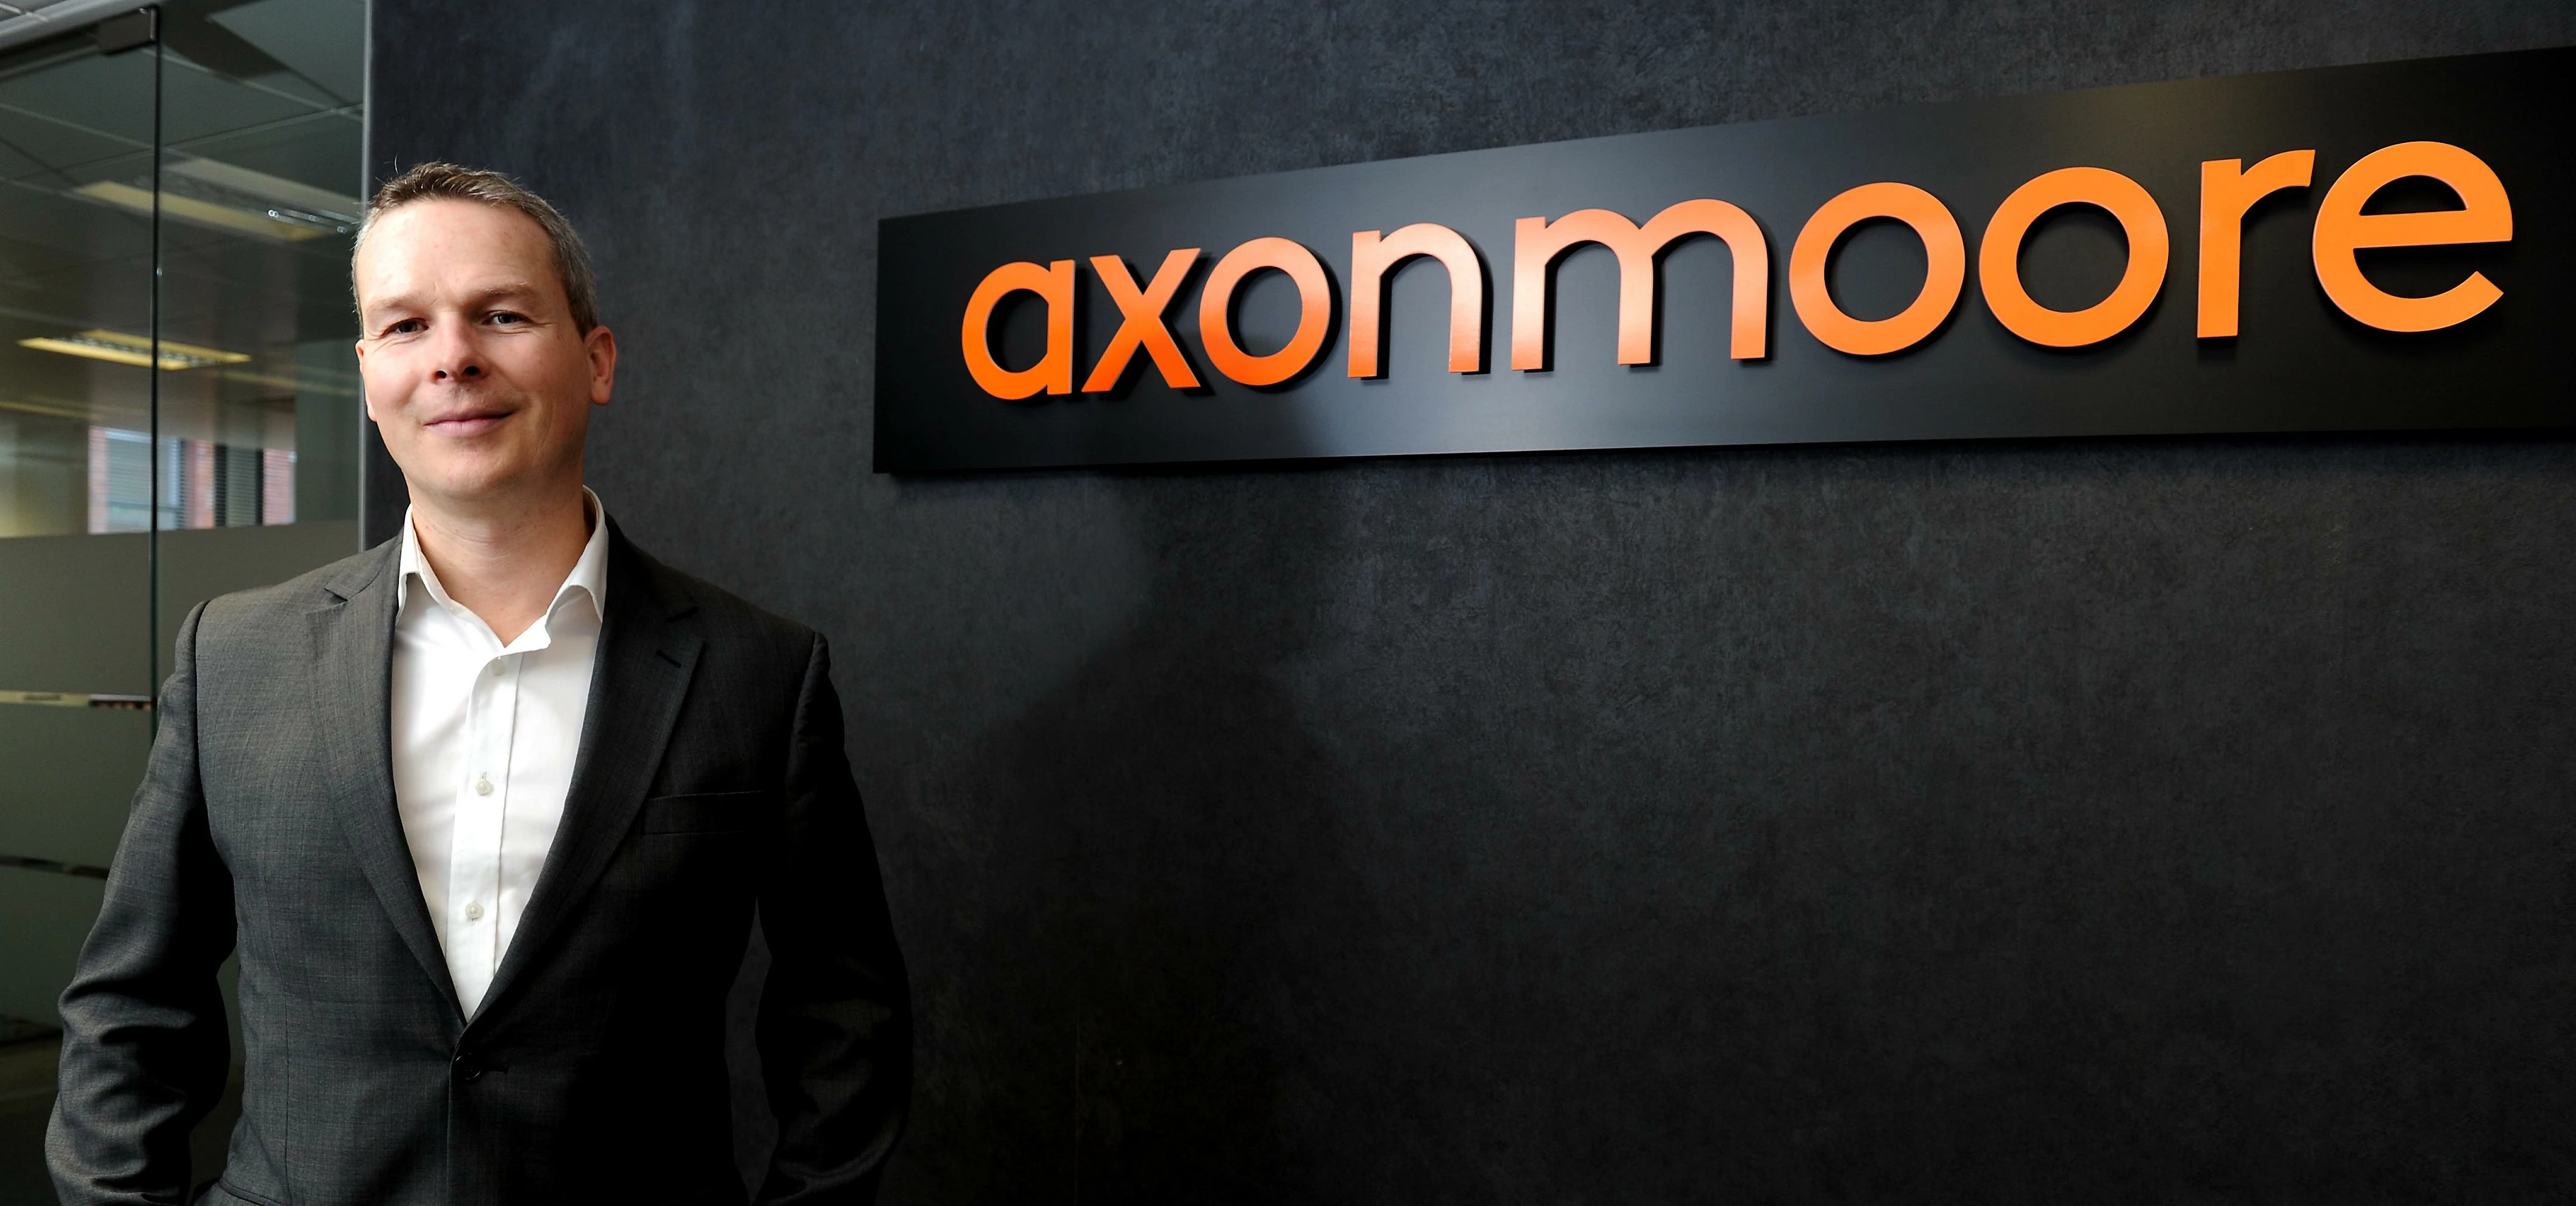 Andrew Edwards - Managing Director of Axon Moore